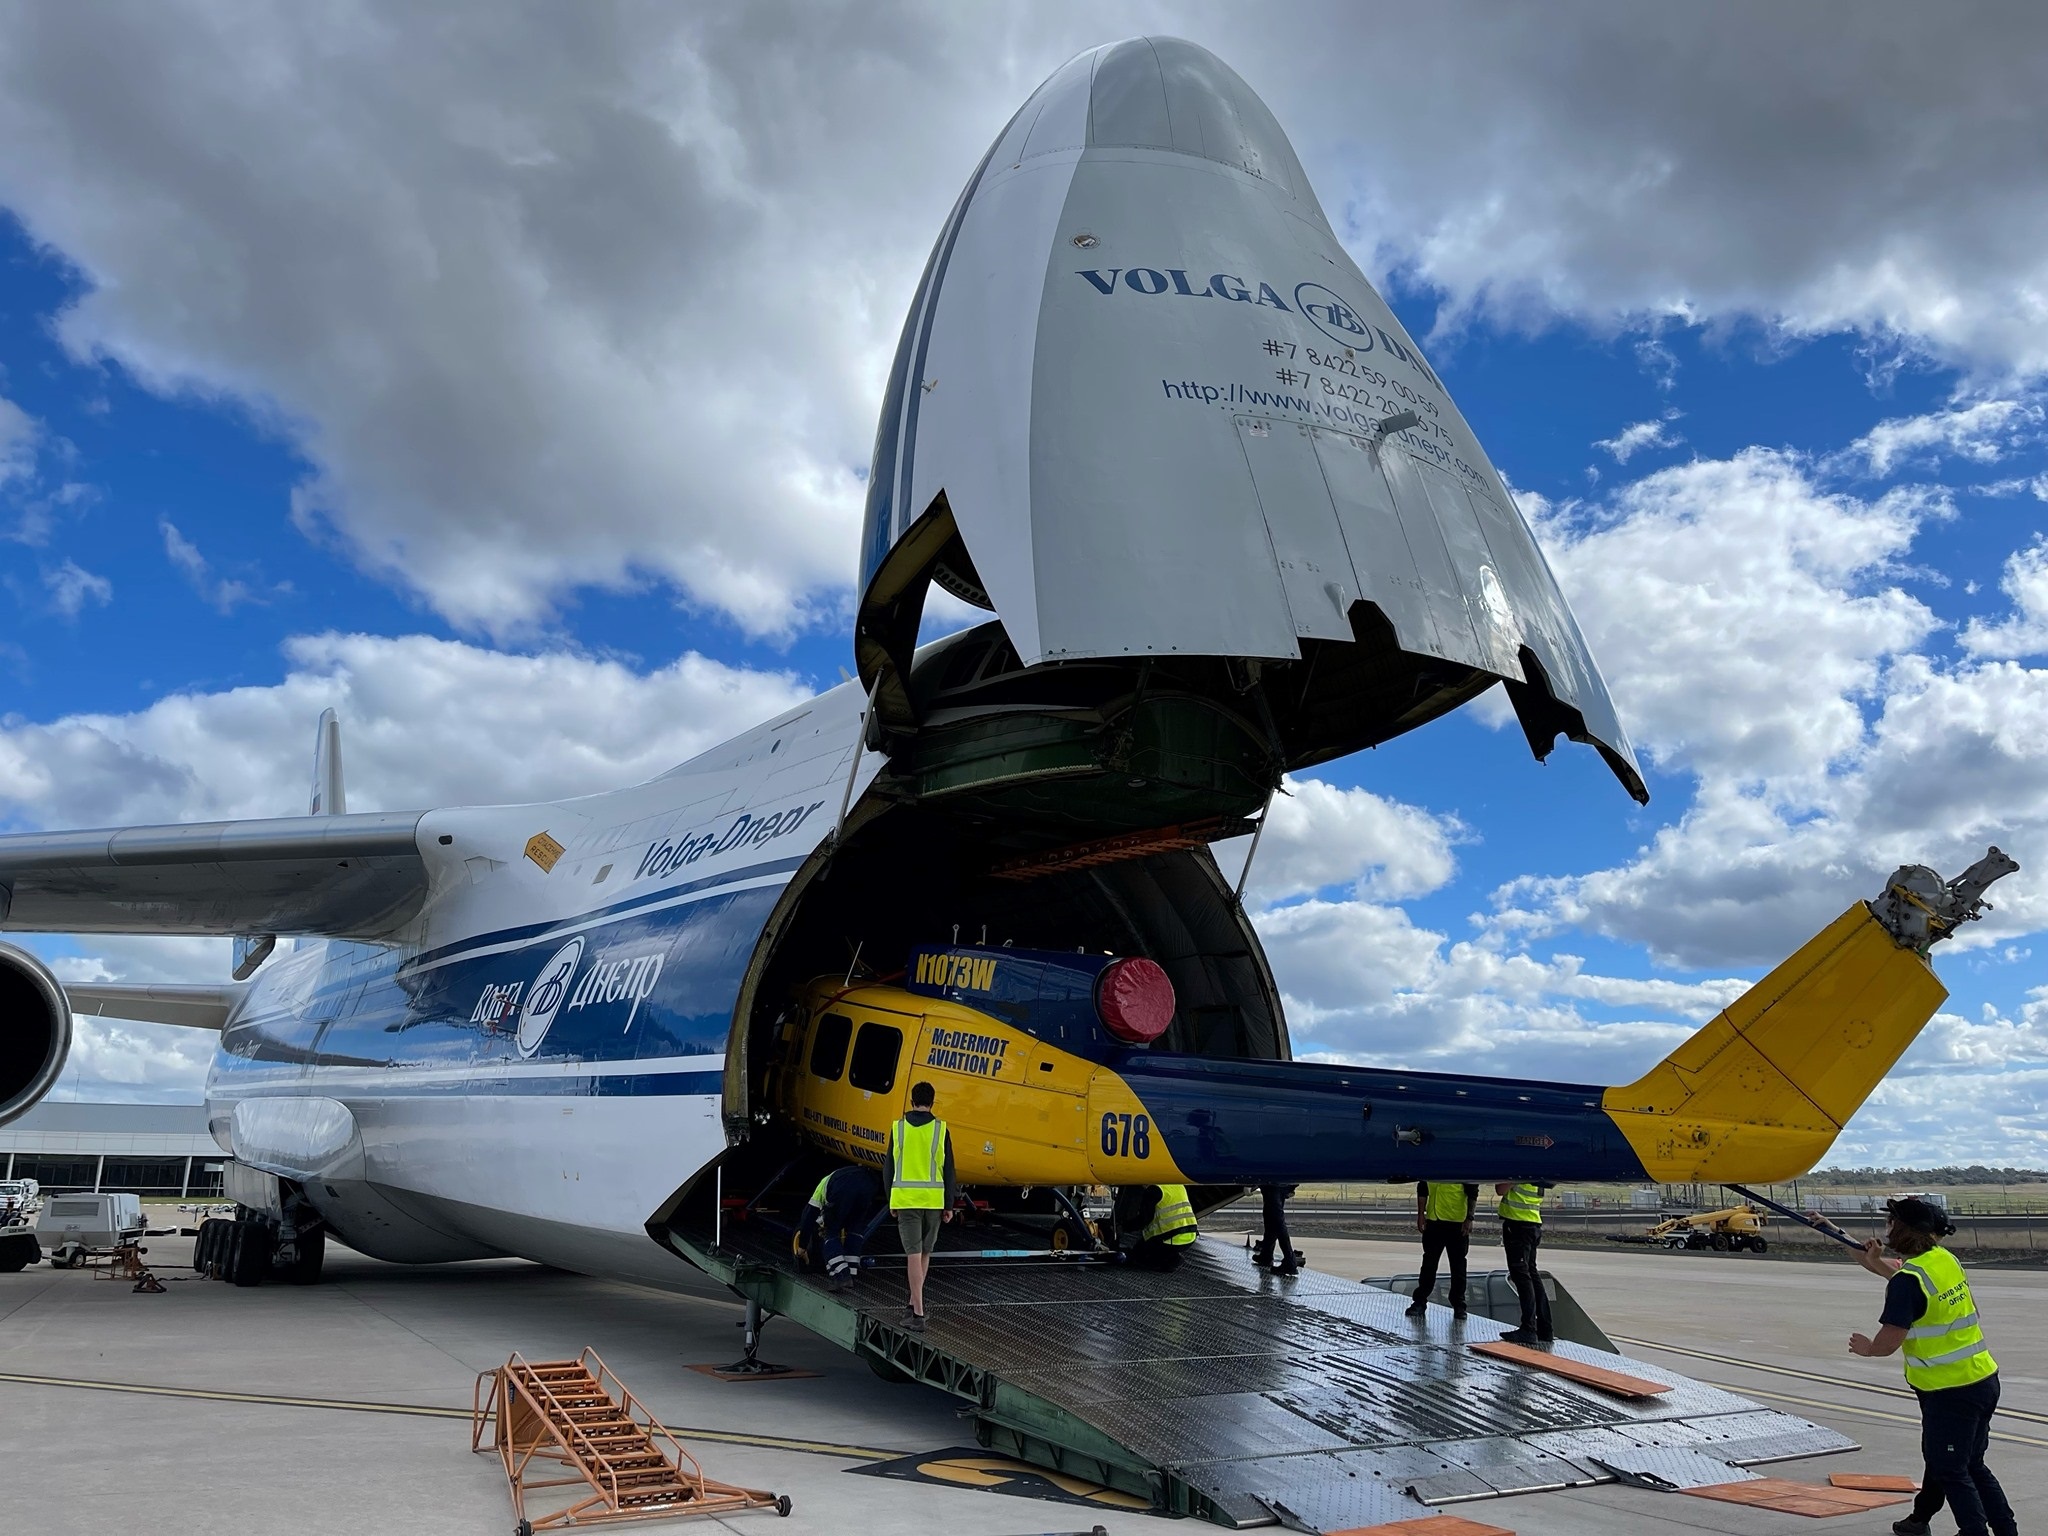 Australian 'Water Bombers' (Bell 214B)  transported   by  Russian Volga-Dnepr  Antonov  An-124   to   Fight  the  Wild Fire  in  Greece  !